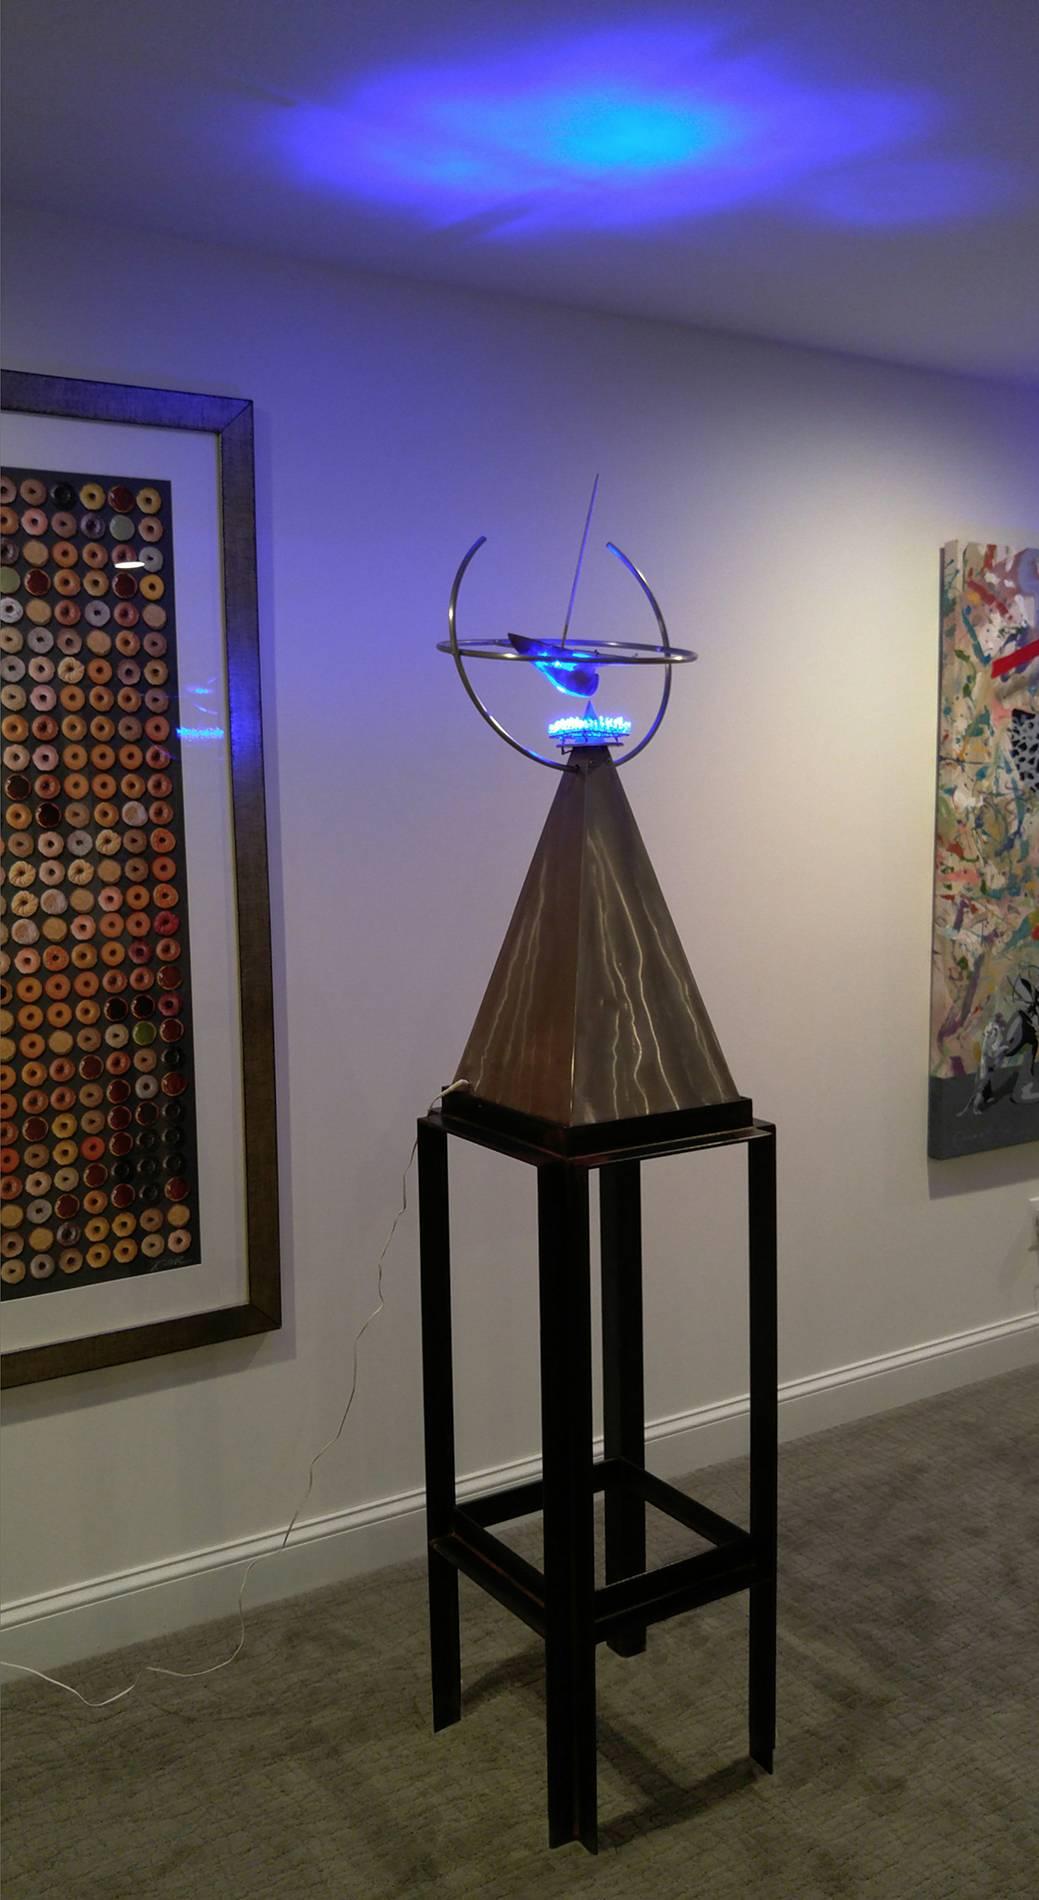 Symmetrical Joy 77x17x17, Stainless Steel and polished bronze with LED lighting, - Sculpture by Robert Roesch